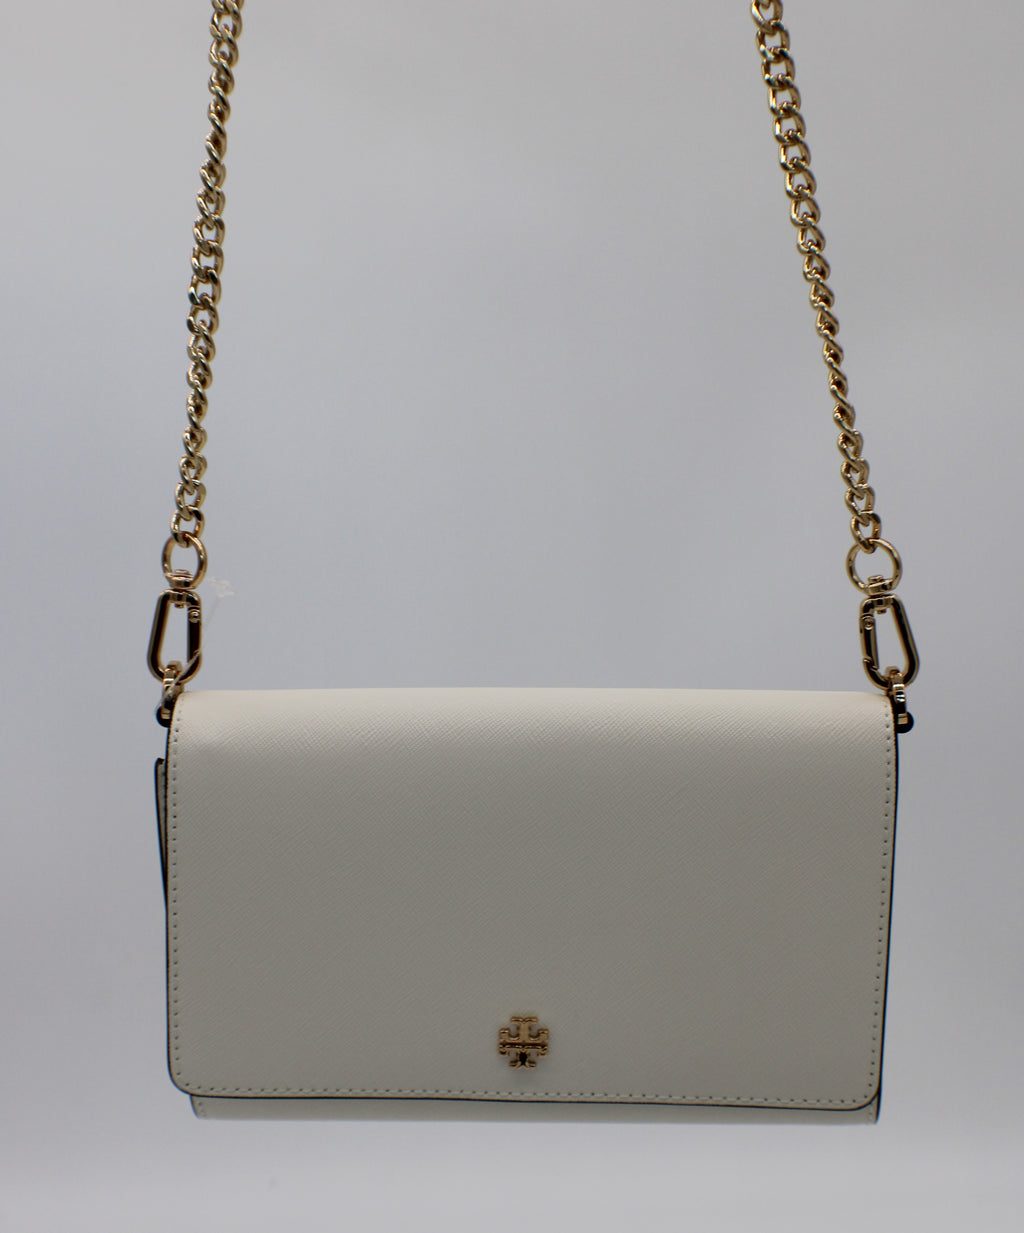 NWT Tory Burch Emerson Chain Wallet Saffiano Leather Crossbody in French  Gary